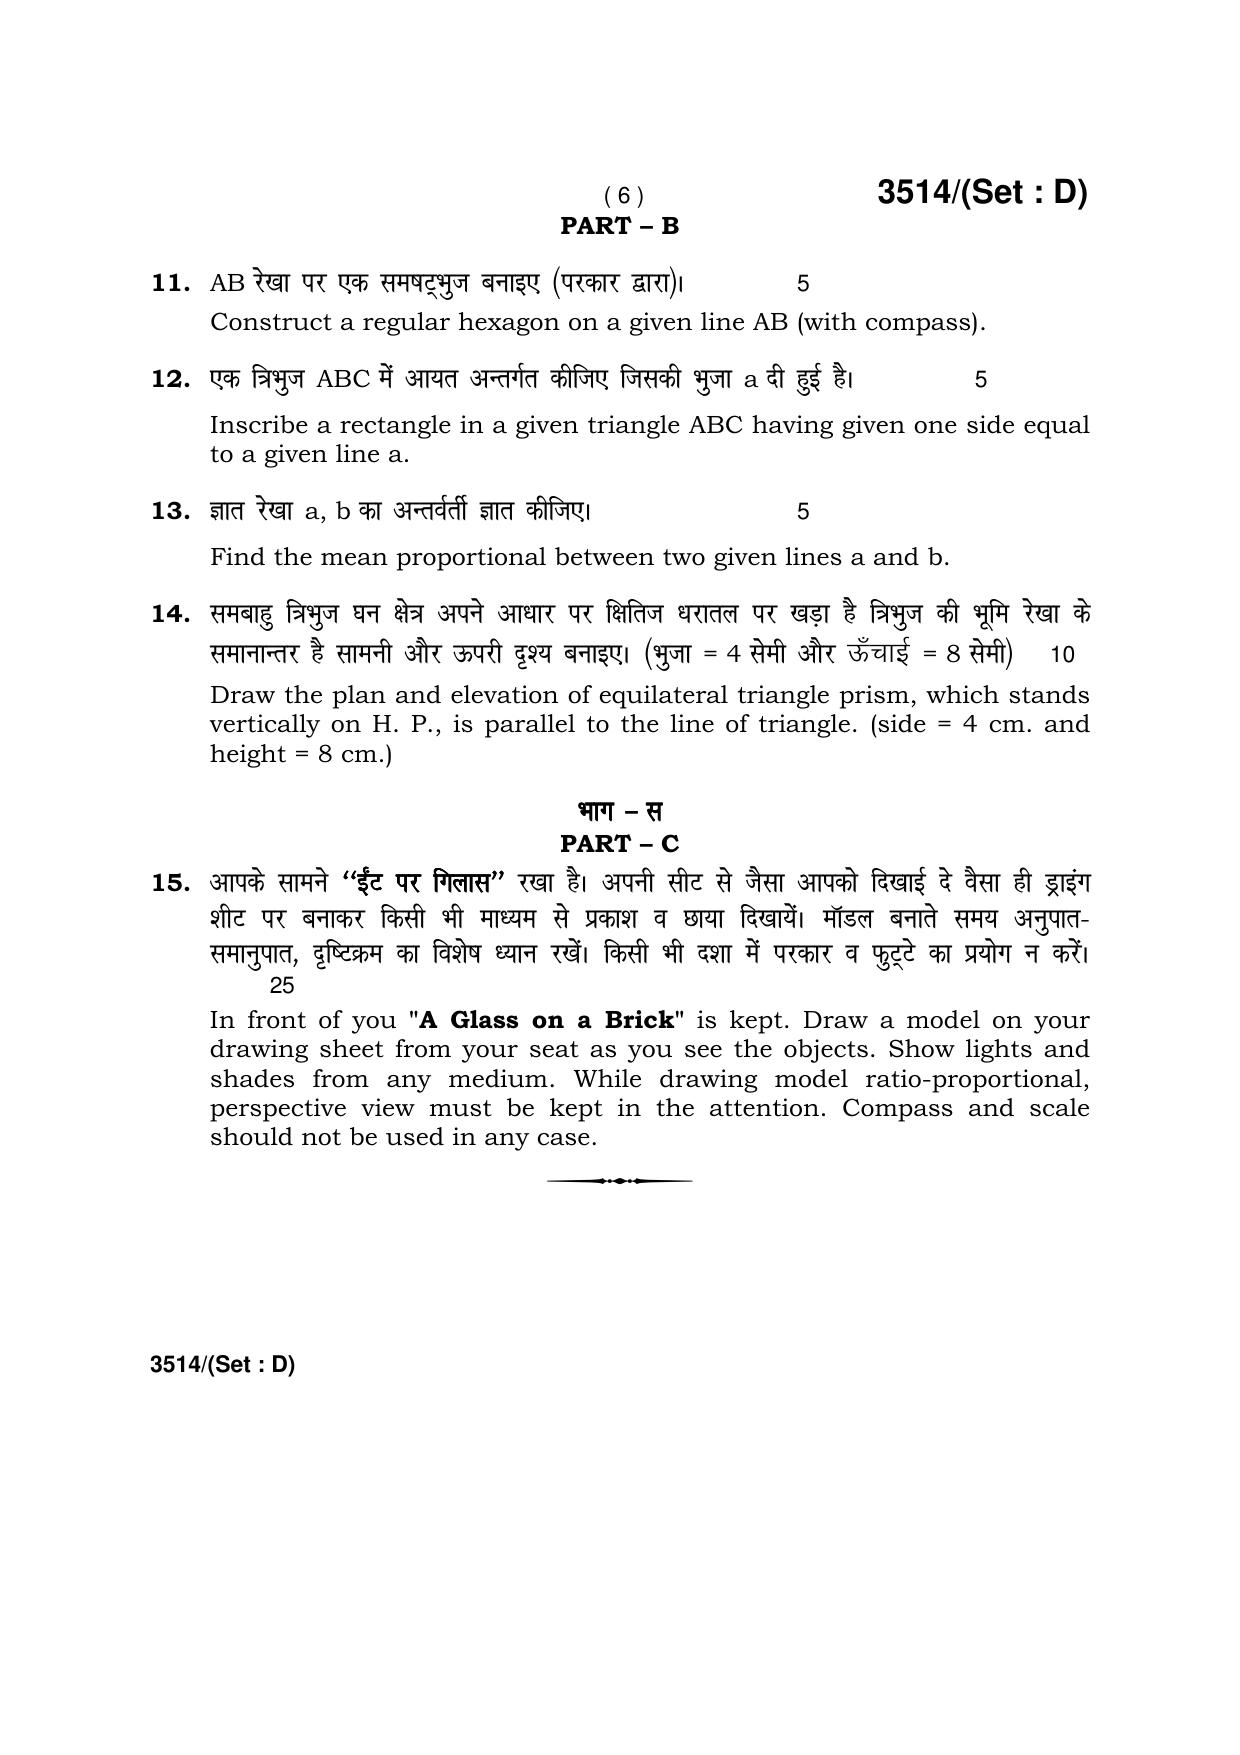 Haryana Board HBSE Class 10 Drawing -D 2018 Question Paper - Page 6